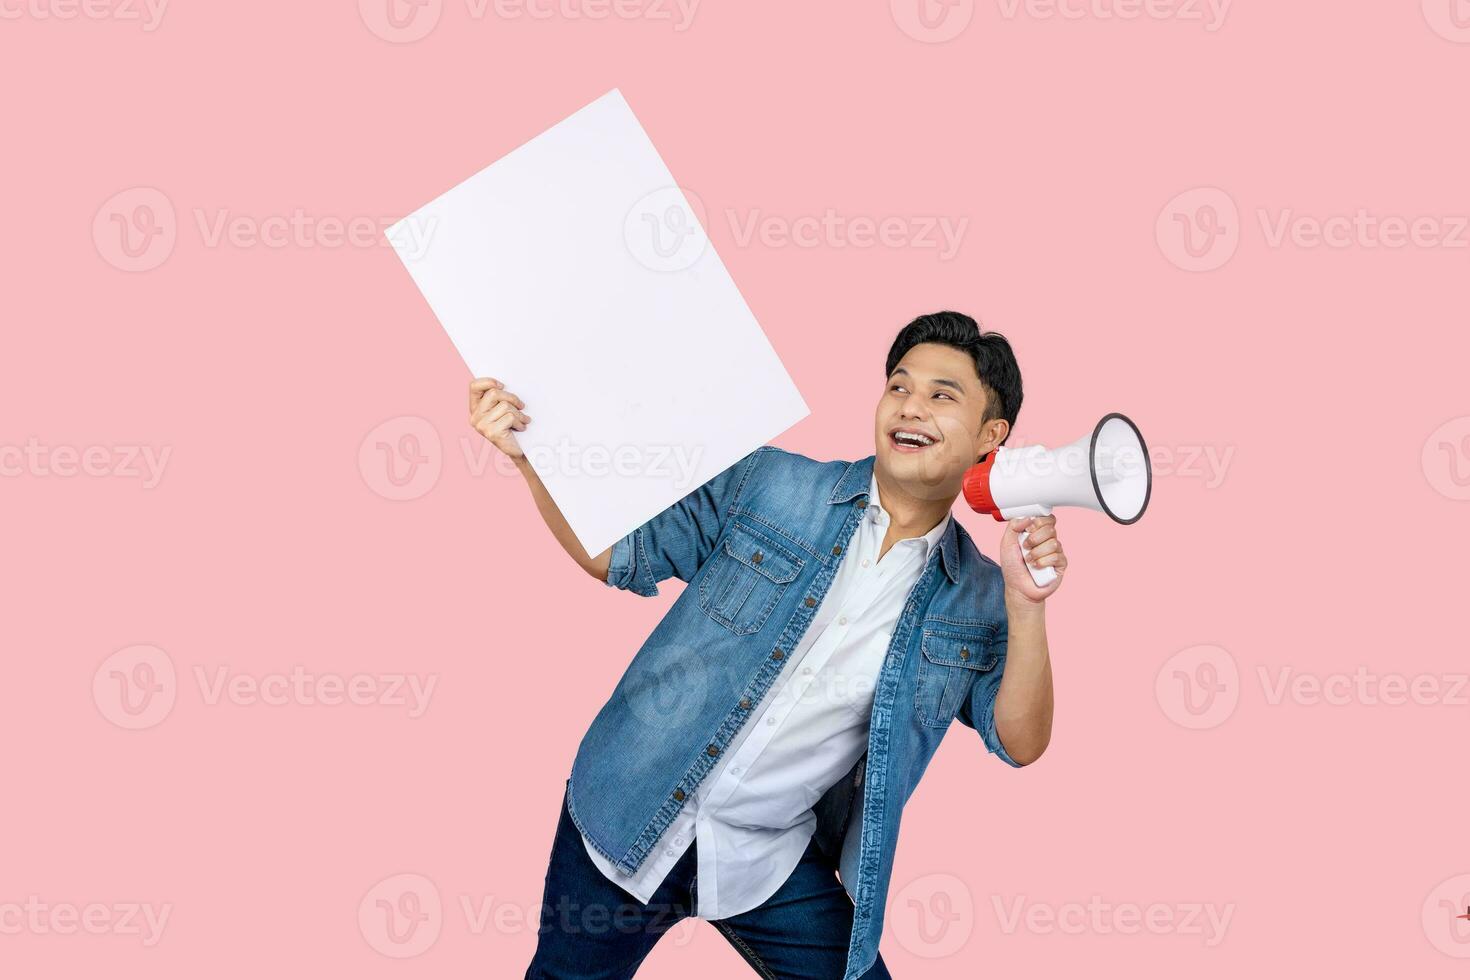 Handsome man holding megaphone and holding blank sign on pink background photo